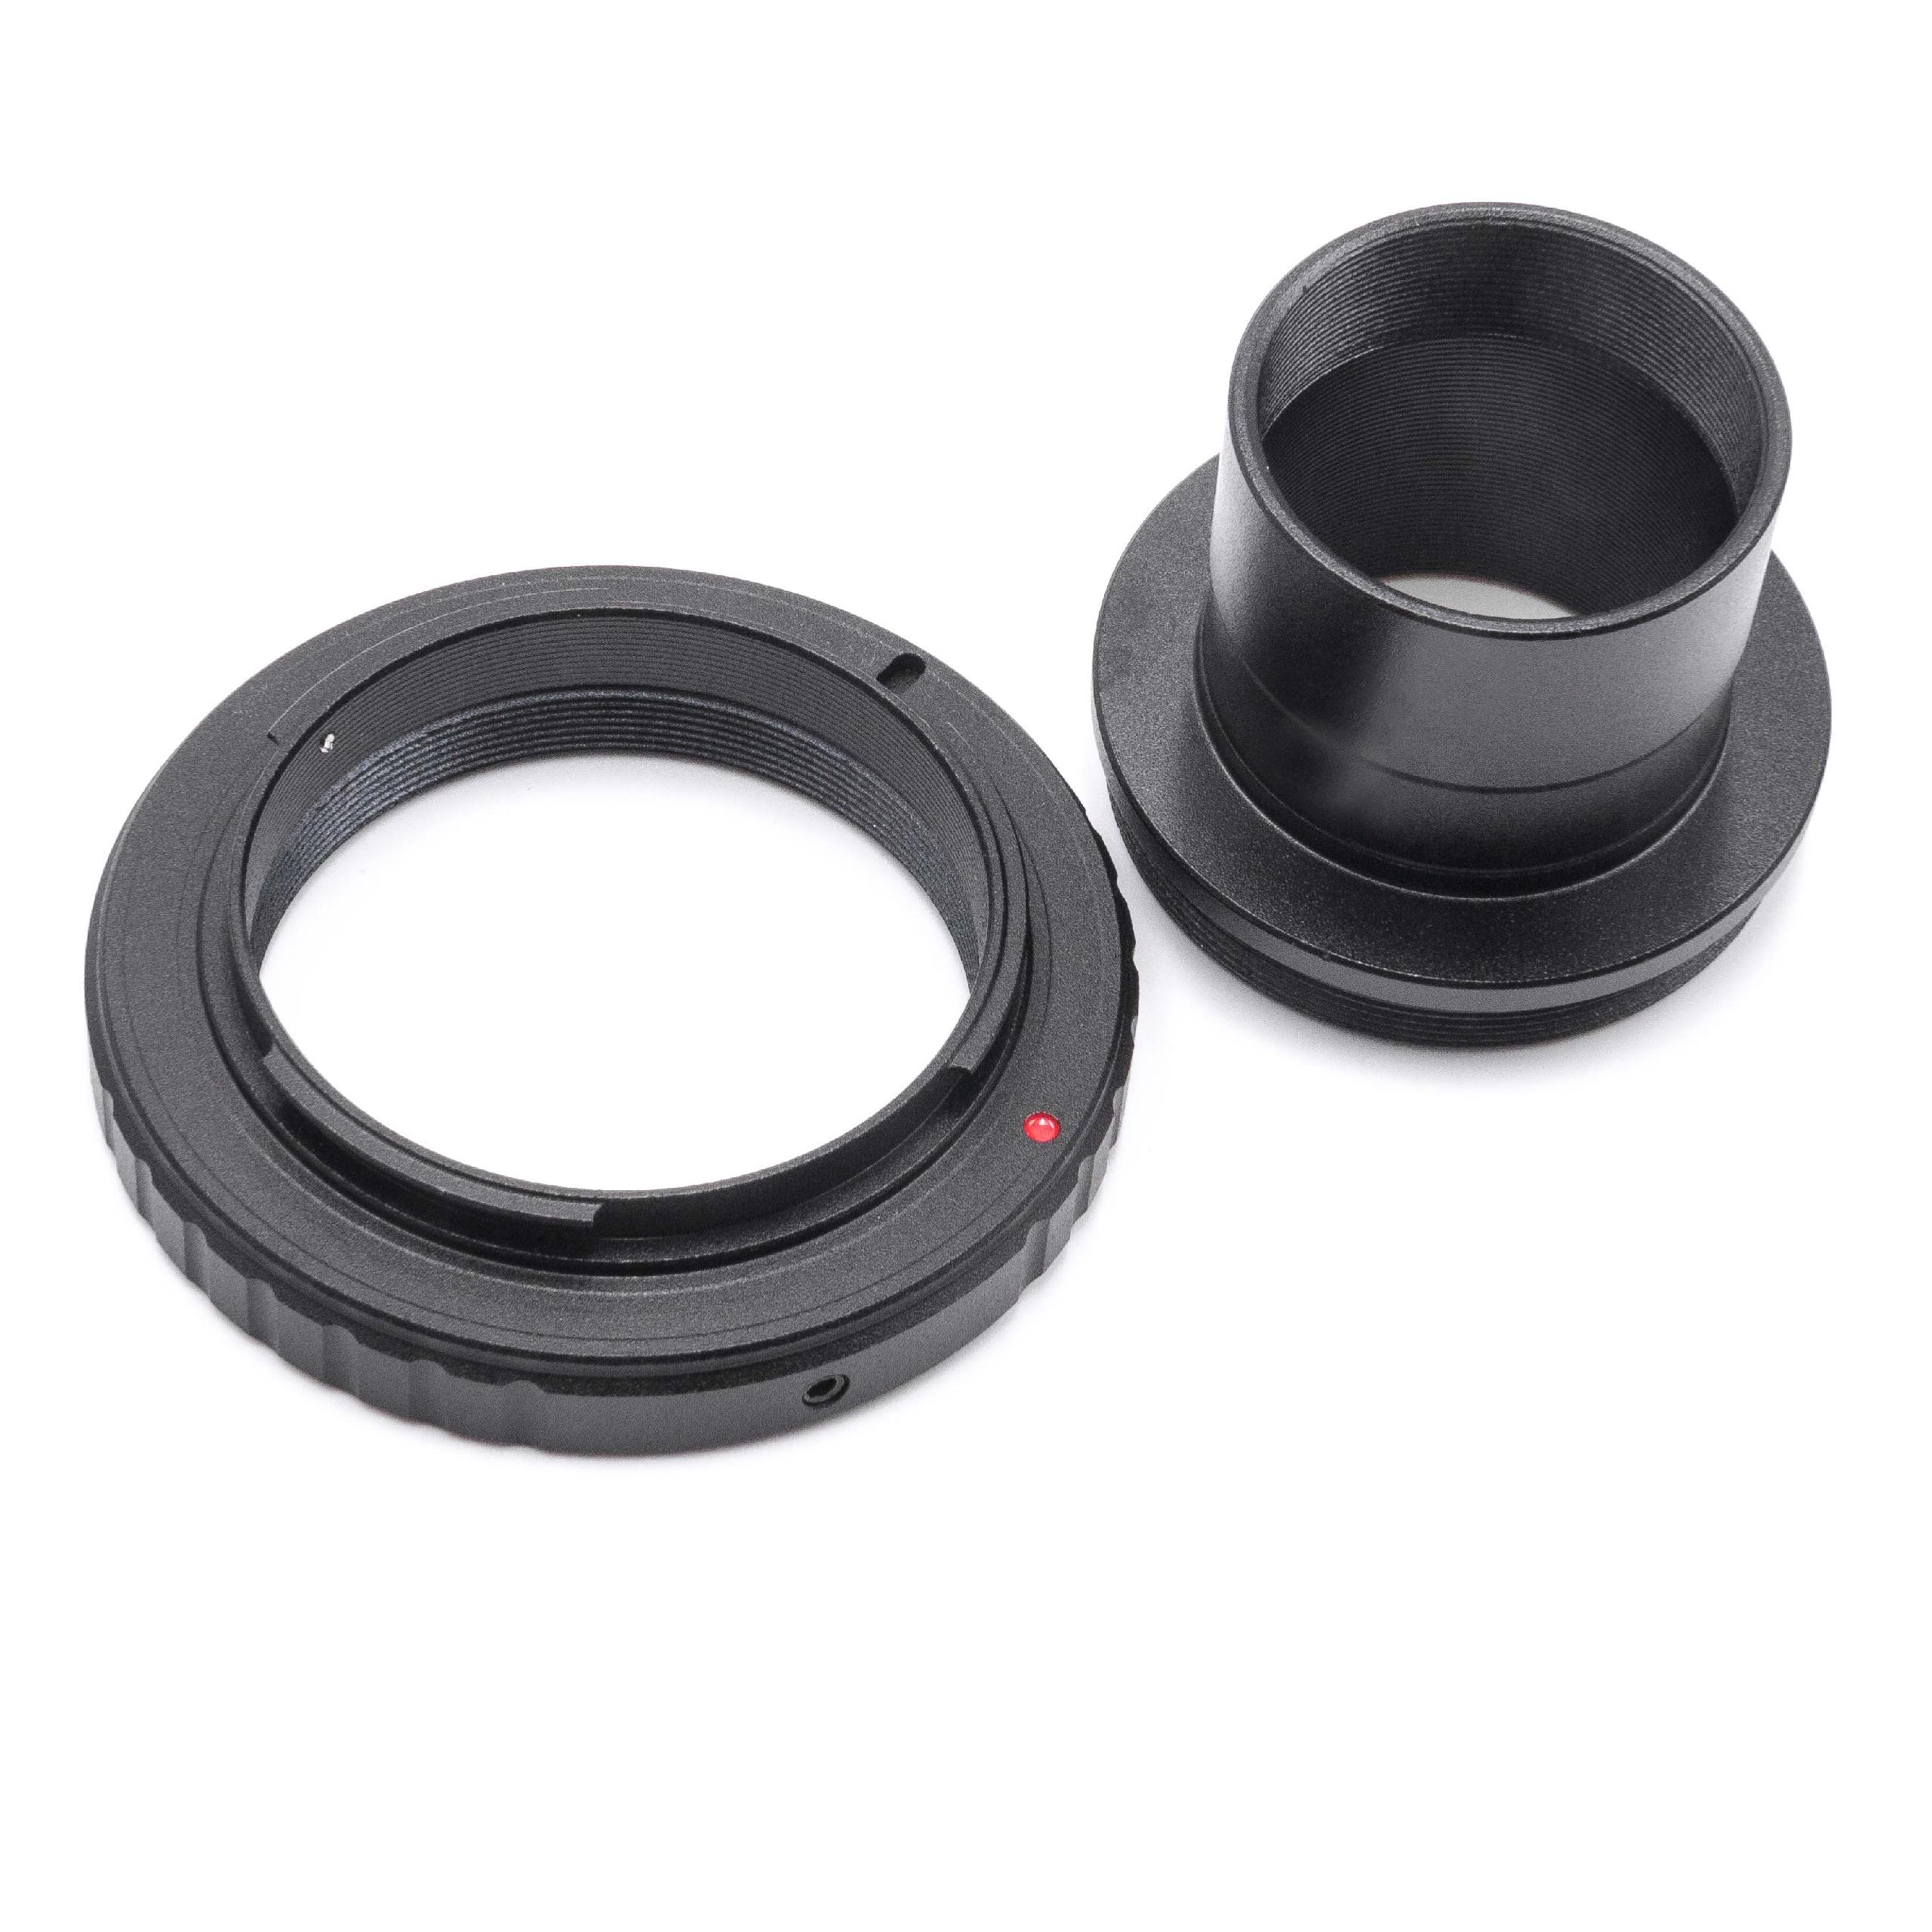 2x Adapter ring, T2-ring adapter, lens mount adapter 1,25" - M42 x 075" suitable for Nikon D50 telescope, came